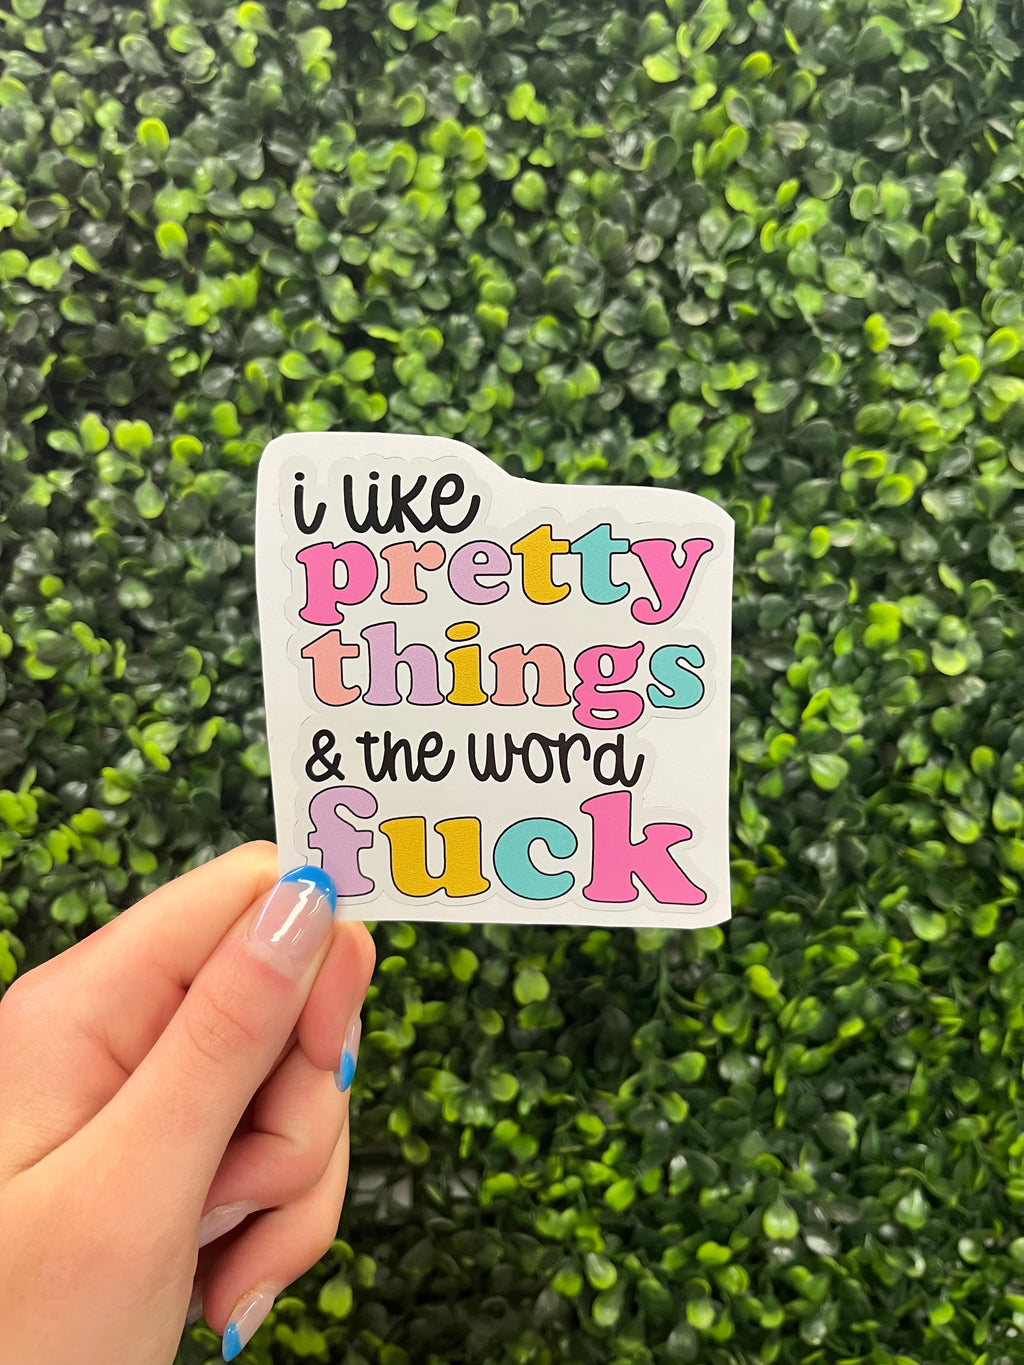 Show off your love of the finer things in life with this "I Like Pretty Things" Sticker Decal! Decorate your laptop or water bottle with a touch of class and an extra dab of sass -- after all, life is too short not to enjoy a little profanity!